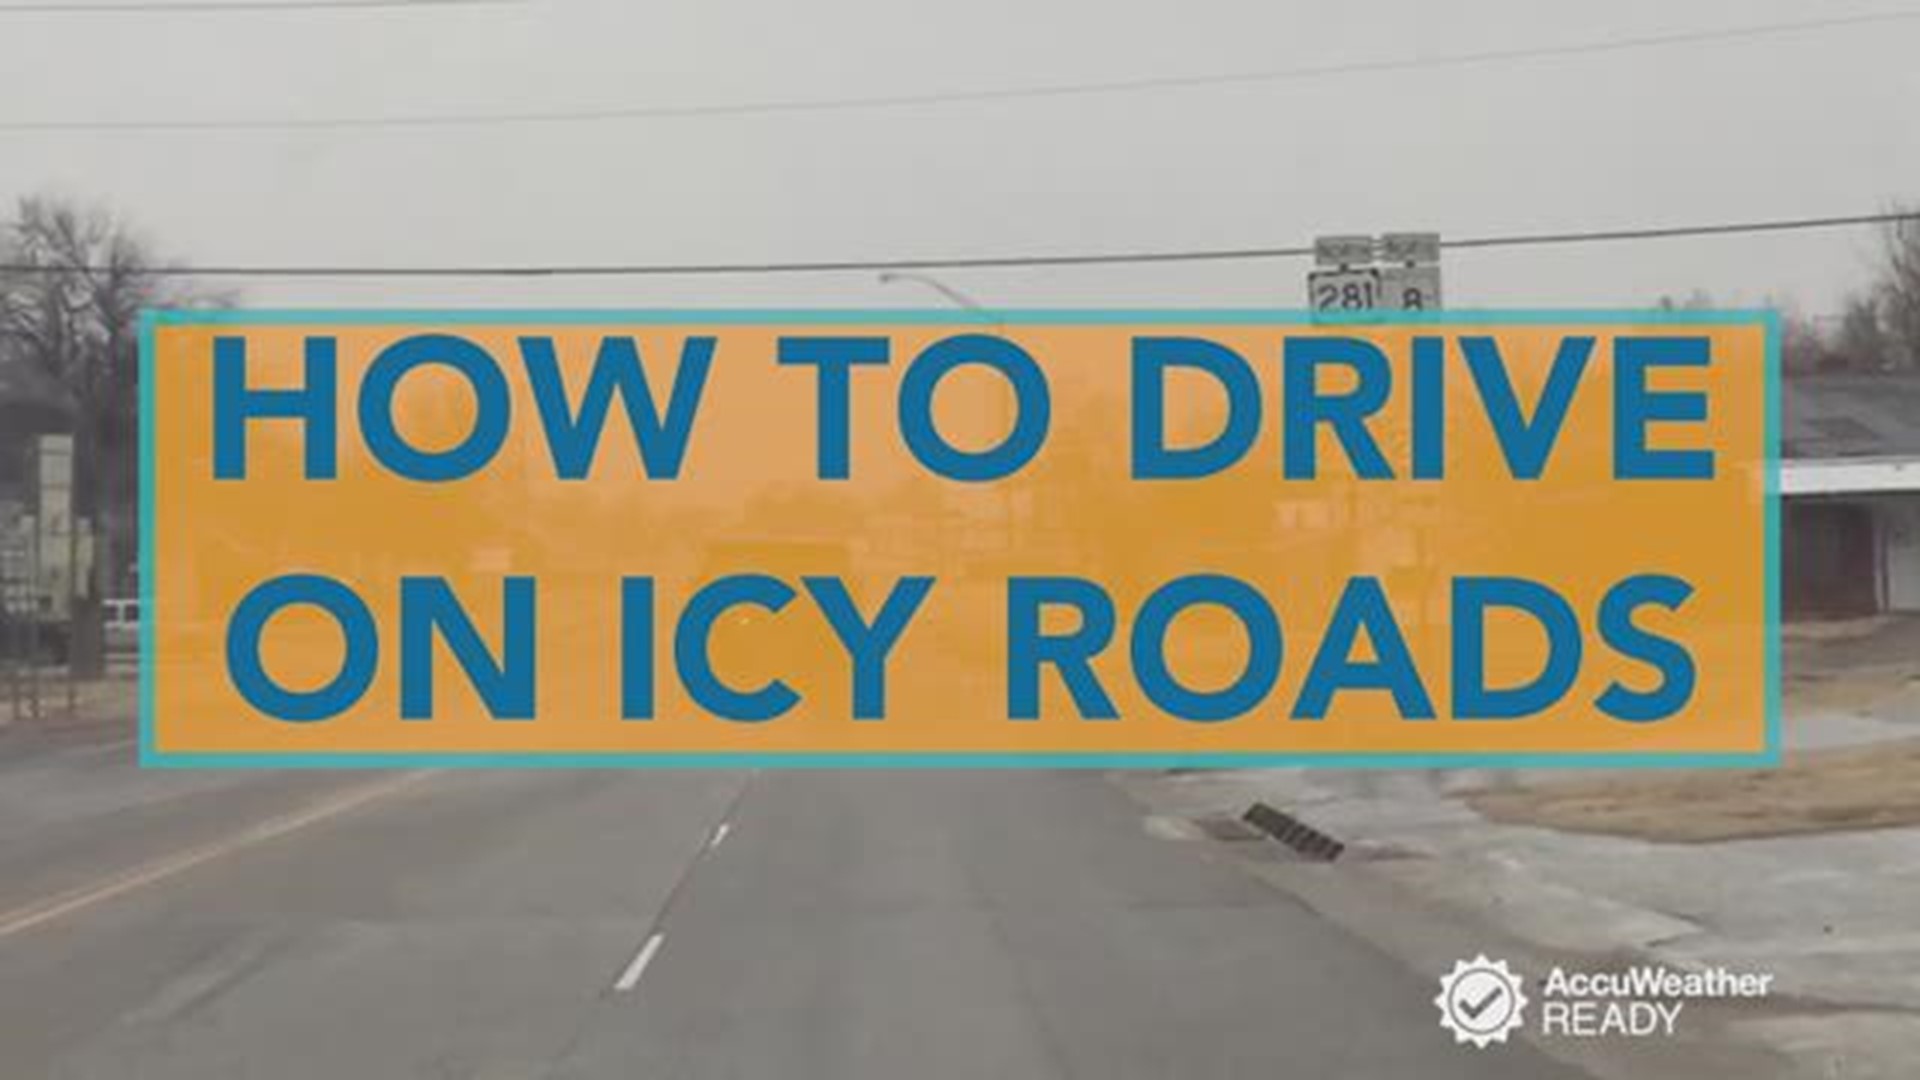 Icy roads are the greatest weather-related hazard to the average person. If you find yourself in the situation, know how to navigate the icy roads safely.